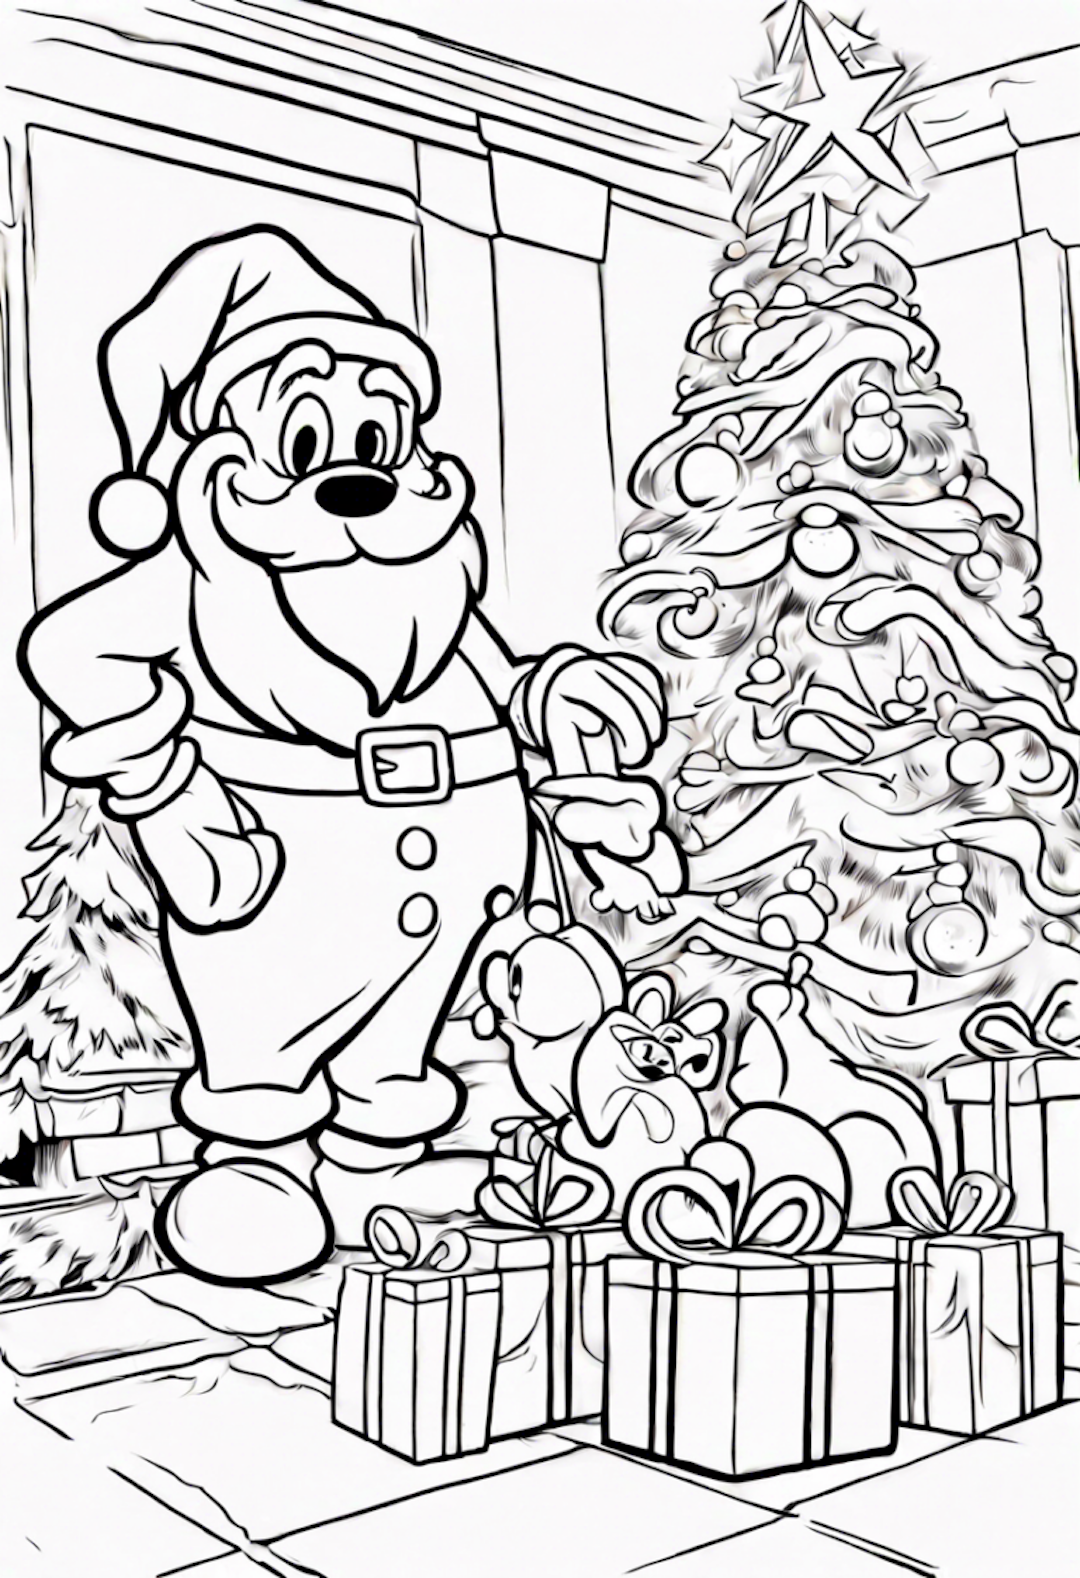 Santa Claus by the Christmas Tree coloring pages